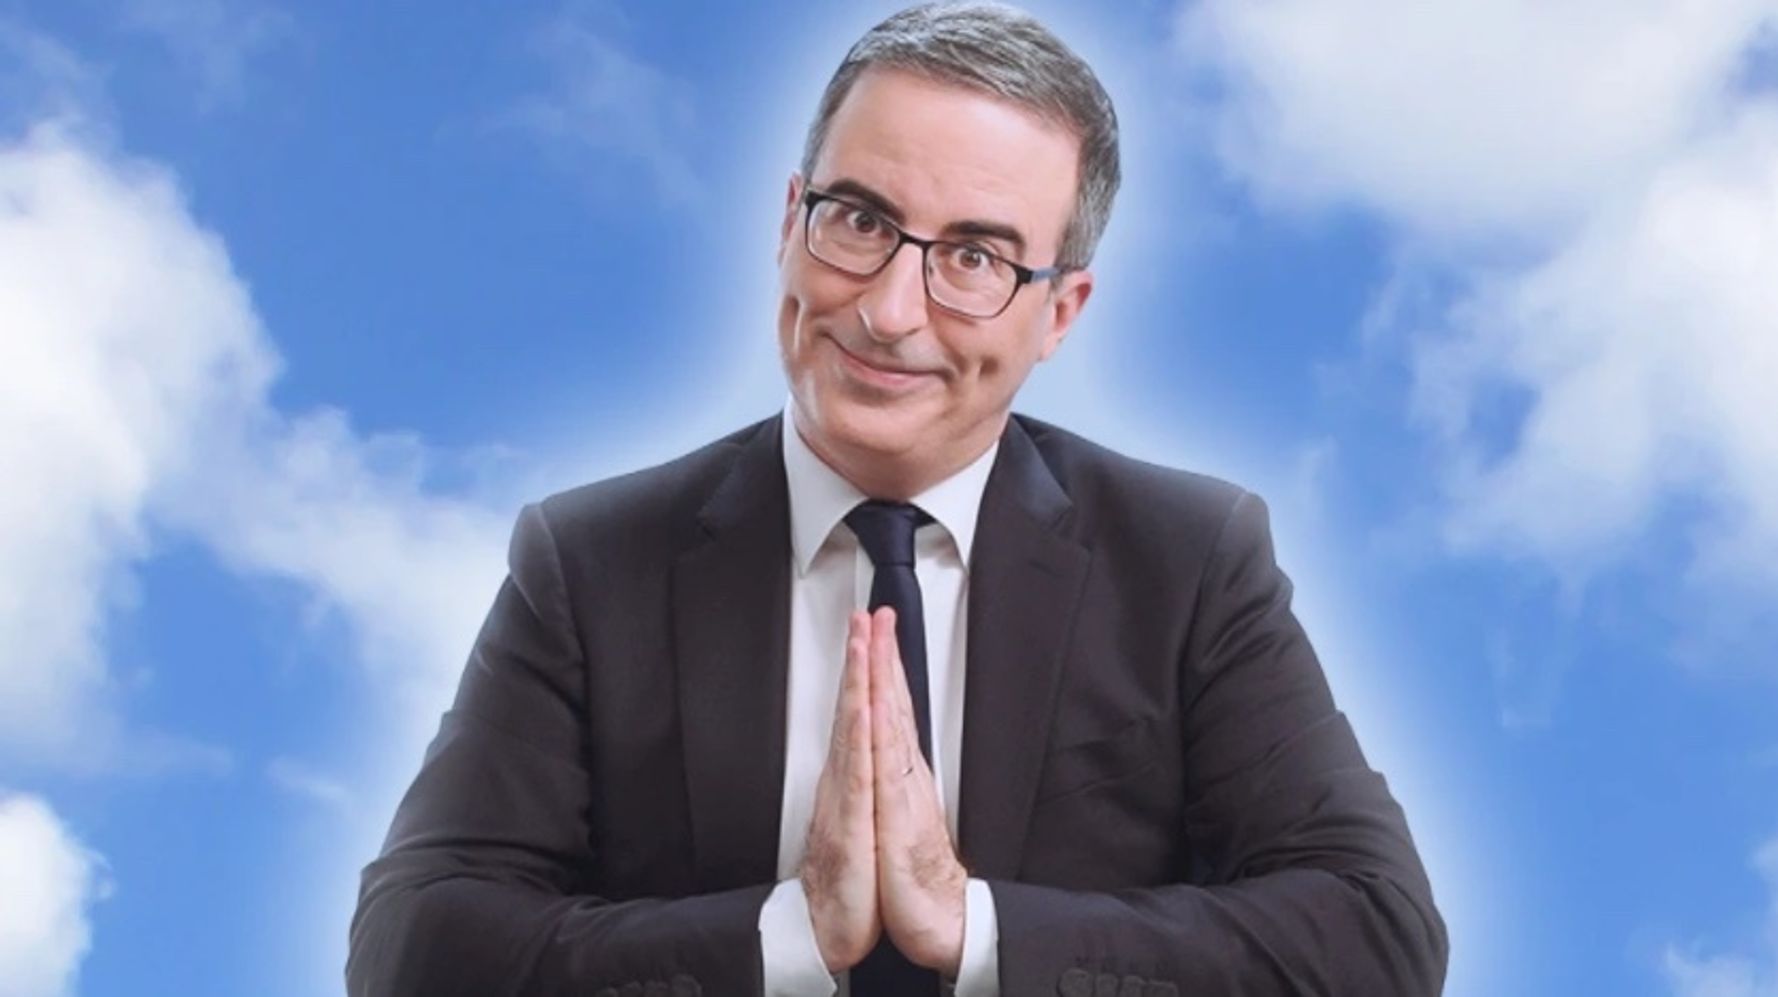 John Oliver Exposes One Of America's Worst Ideas By Creating A 100% Legal Scam